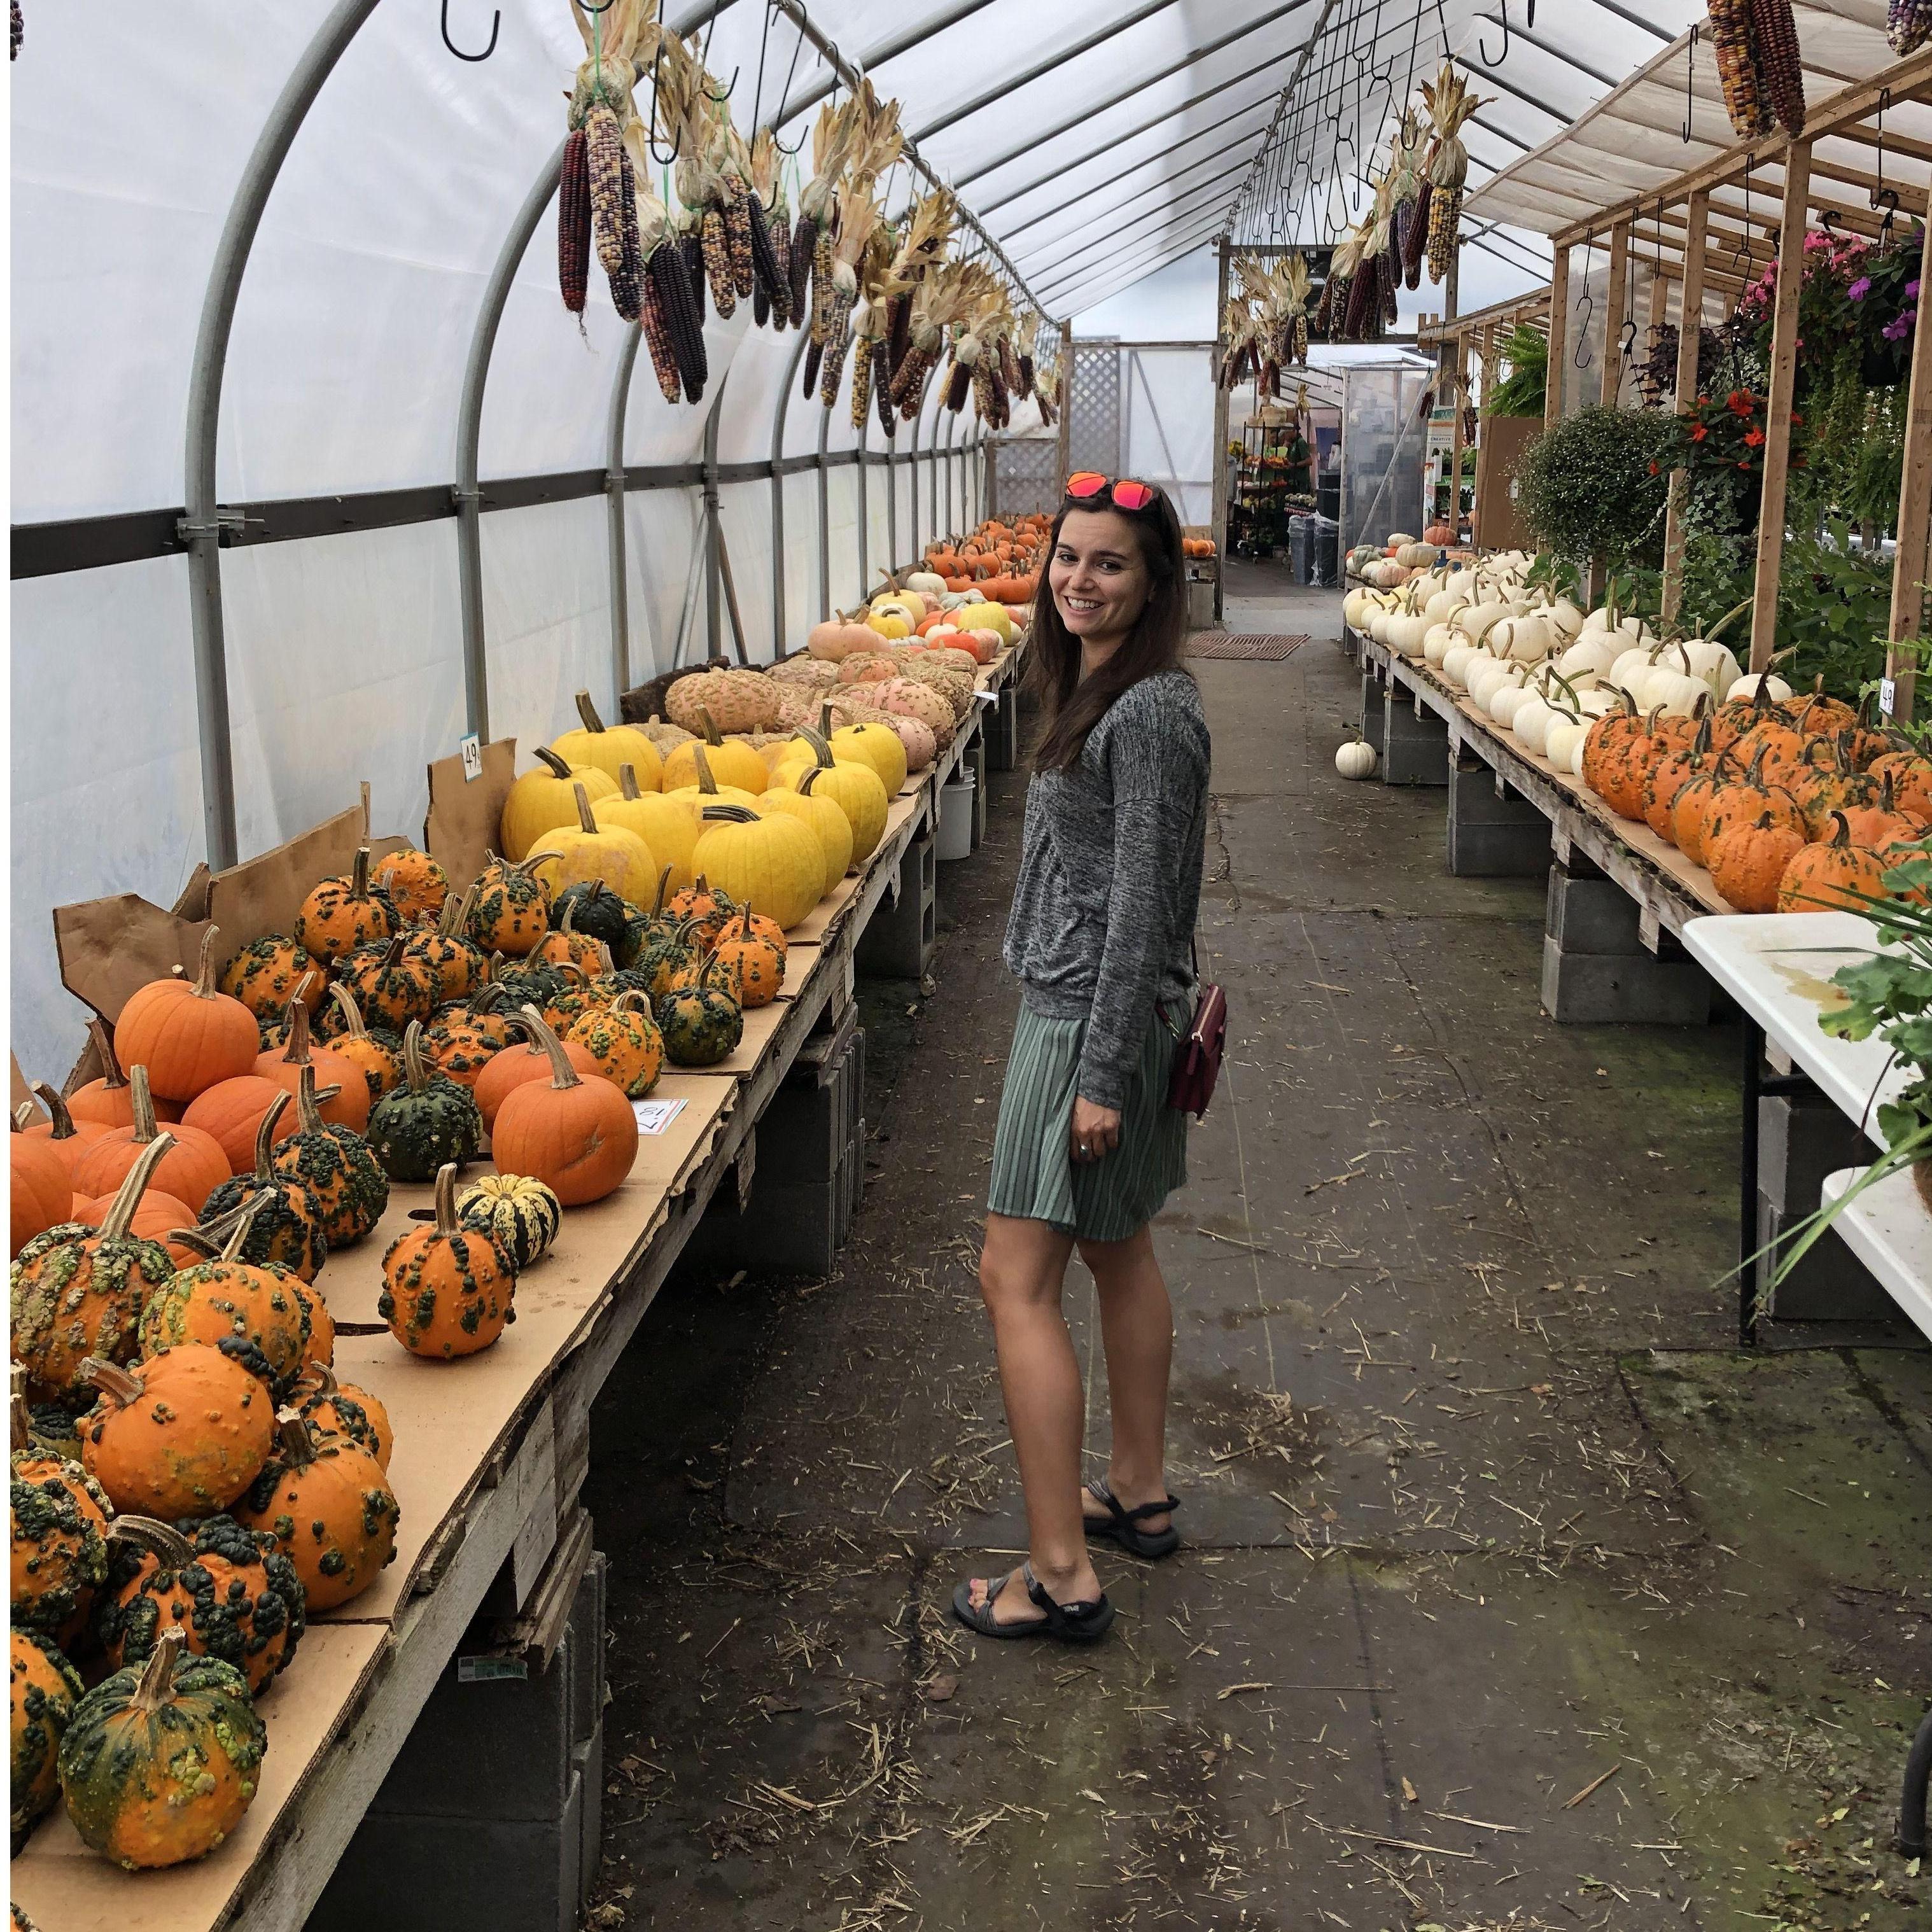 She really likes the warty, crooked, oddball pumpkins.  She wanted them all......